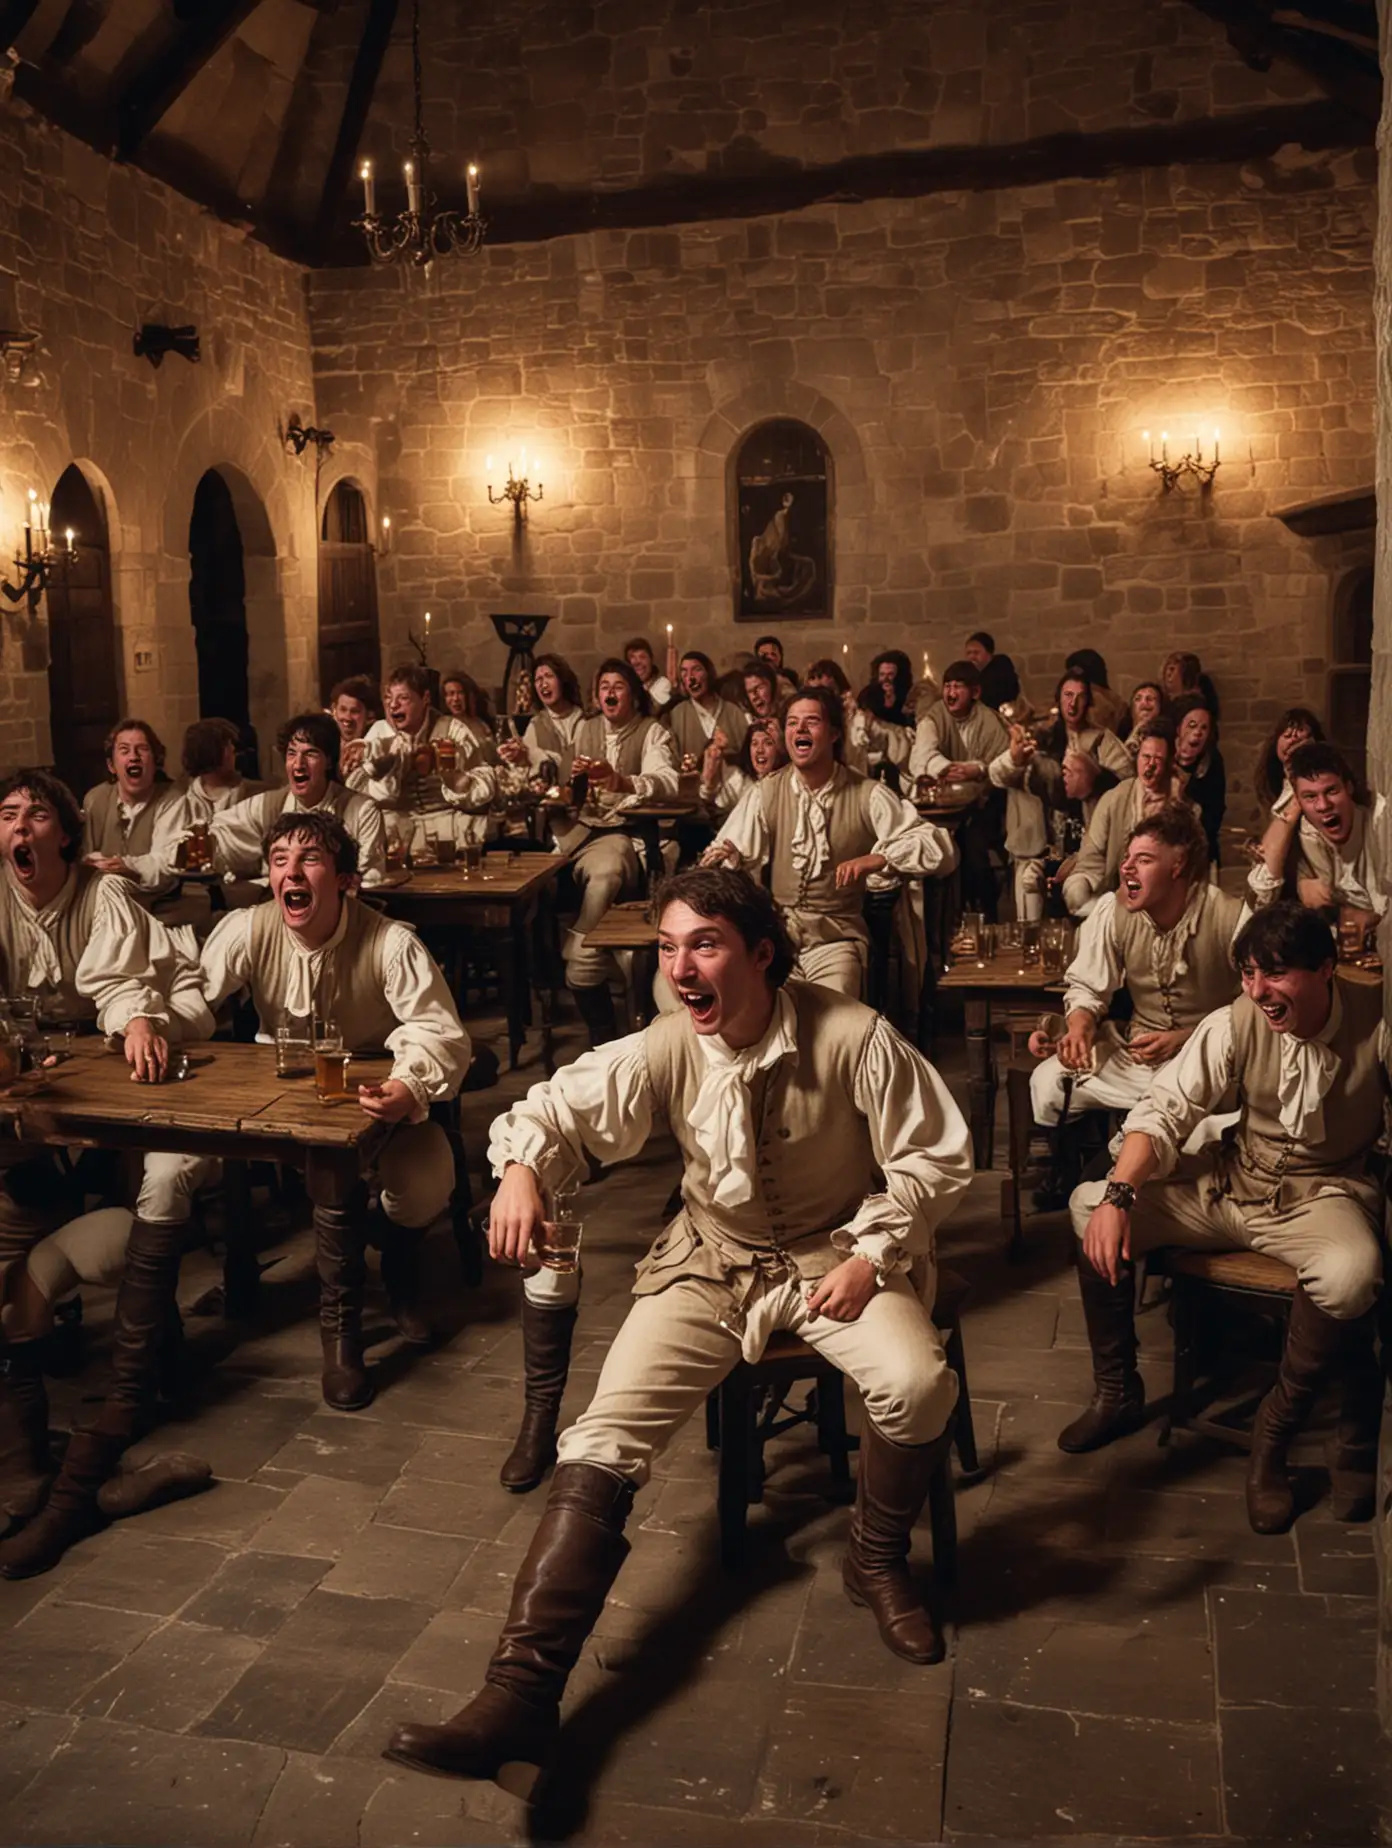 a hall in a 17th century castle, full with young men sitting on tables and drinking, dressed with light clothing, boots, shouting, joyful and happy atmosphere, at night, shot from the floor